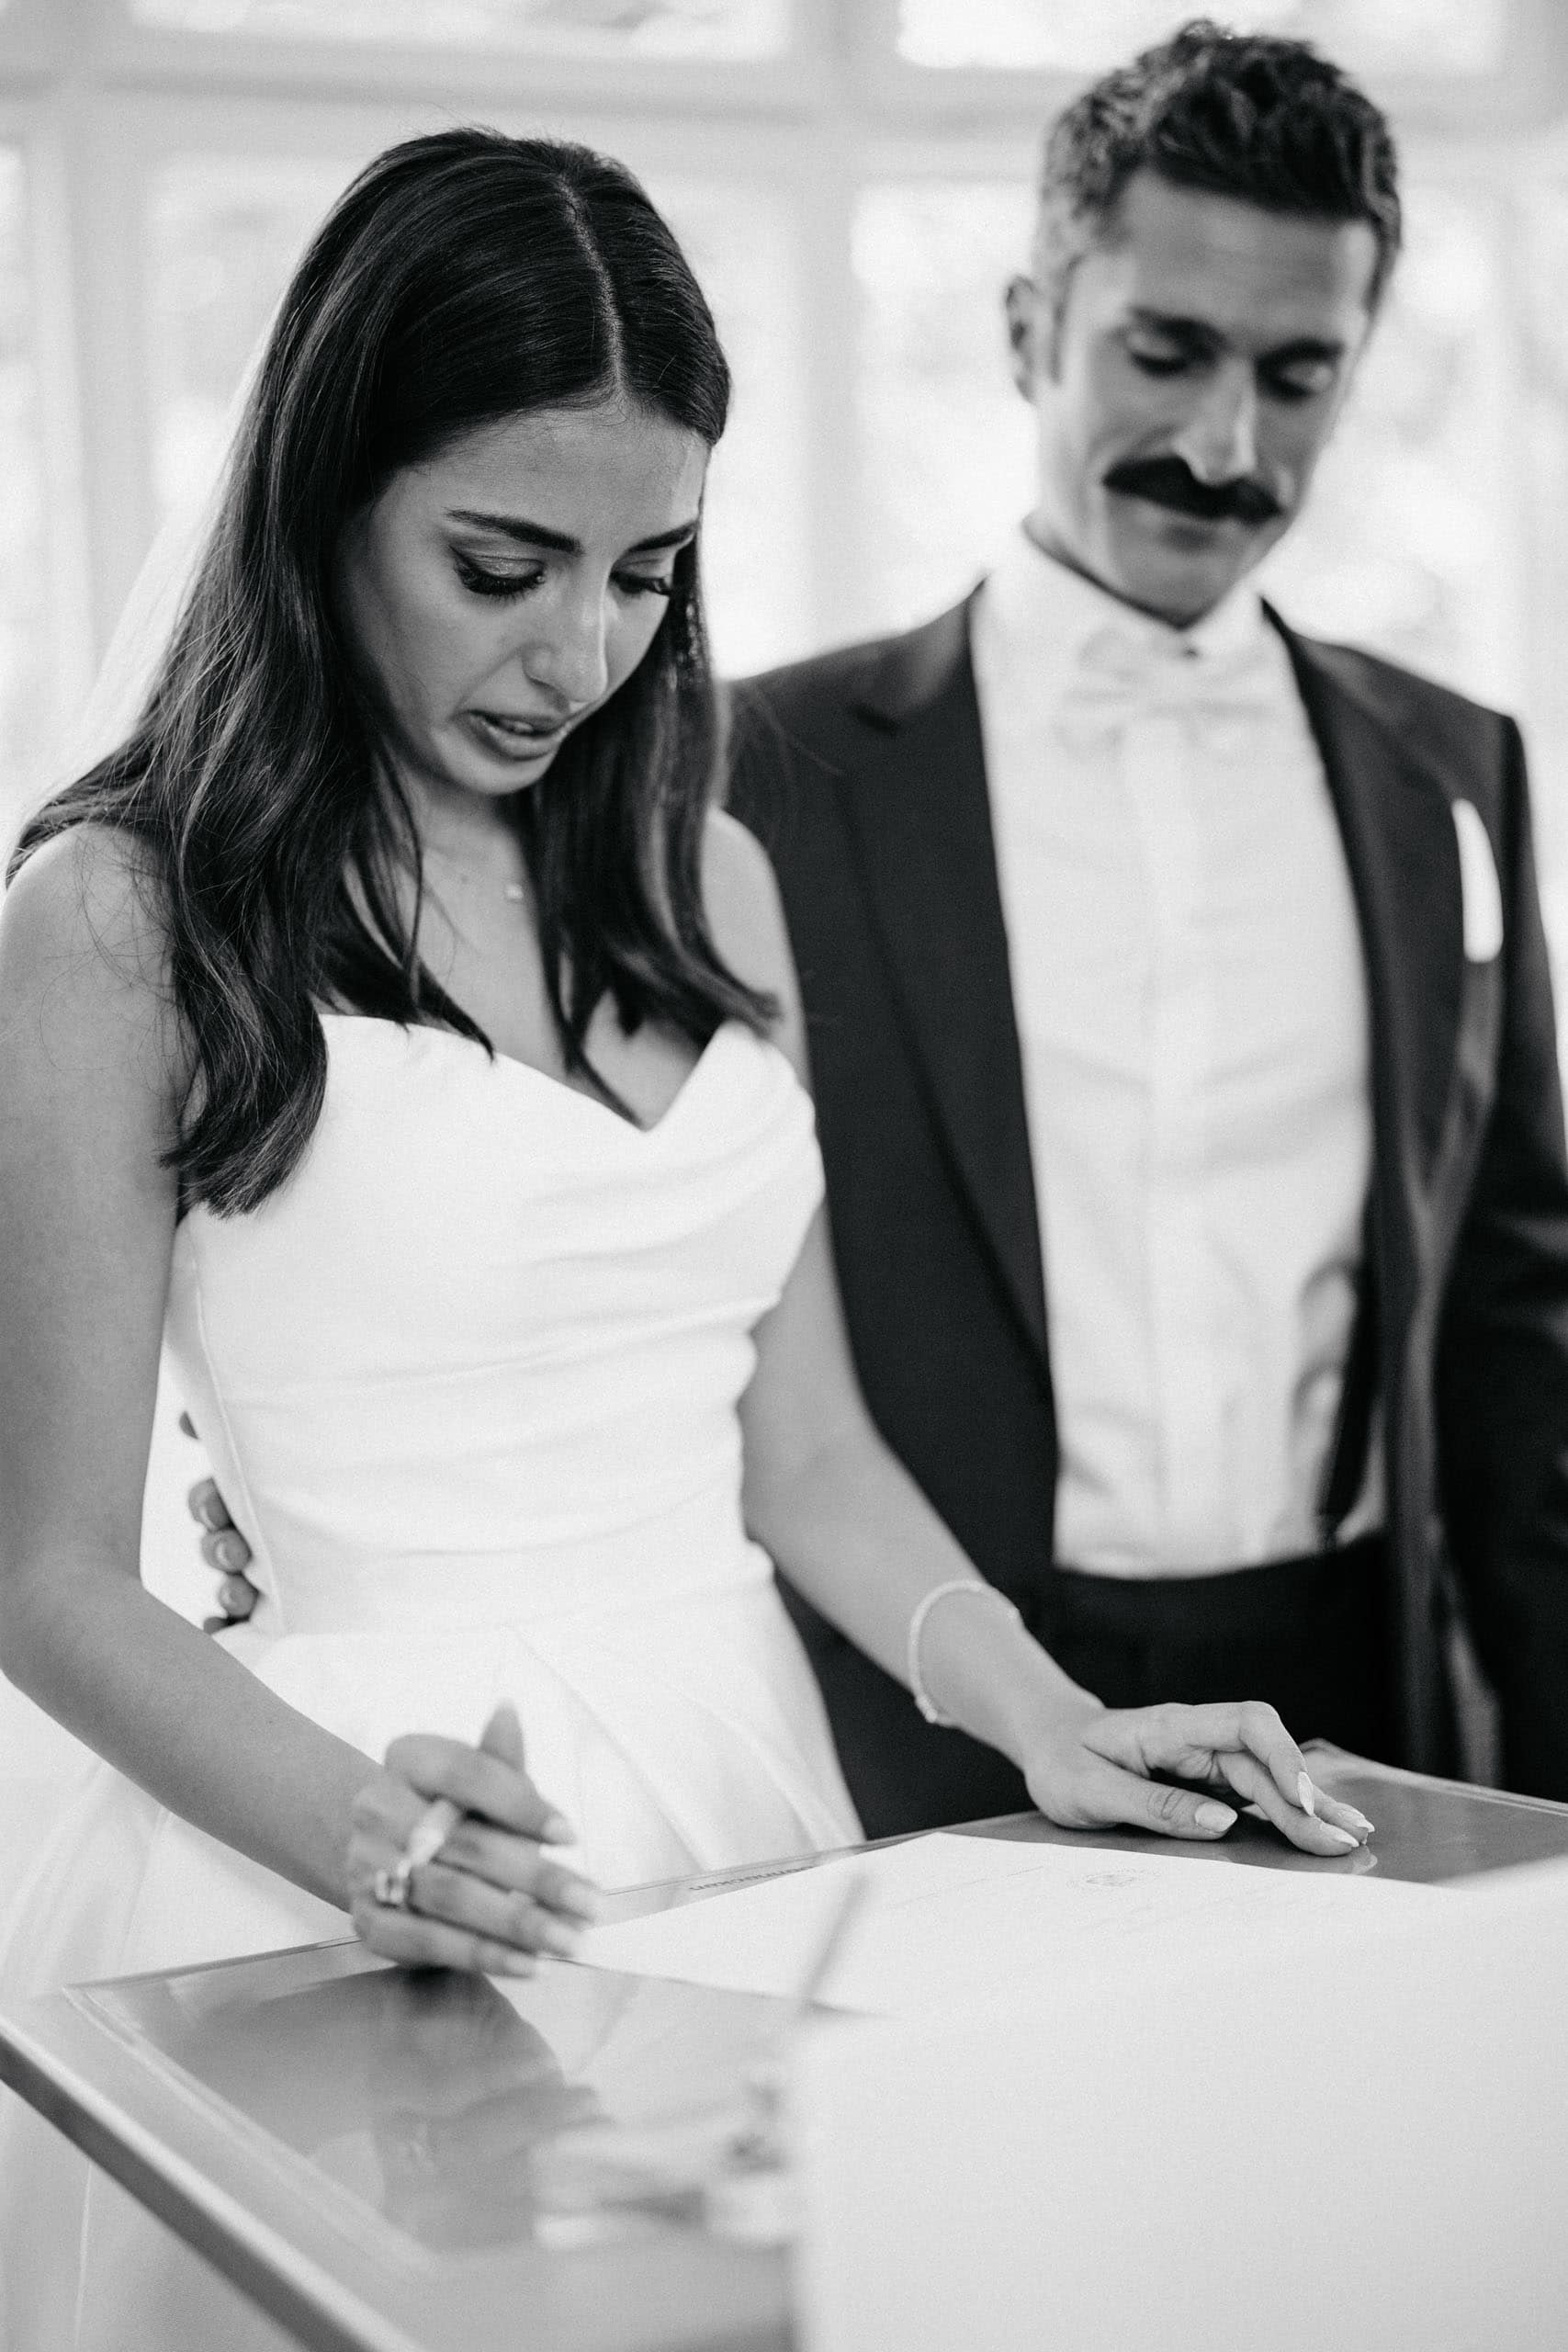 modern wedding photography in munich and tegernsee15h07m rd109311